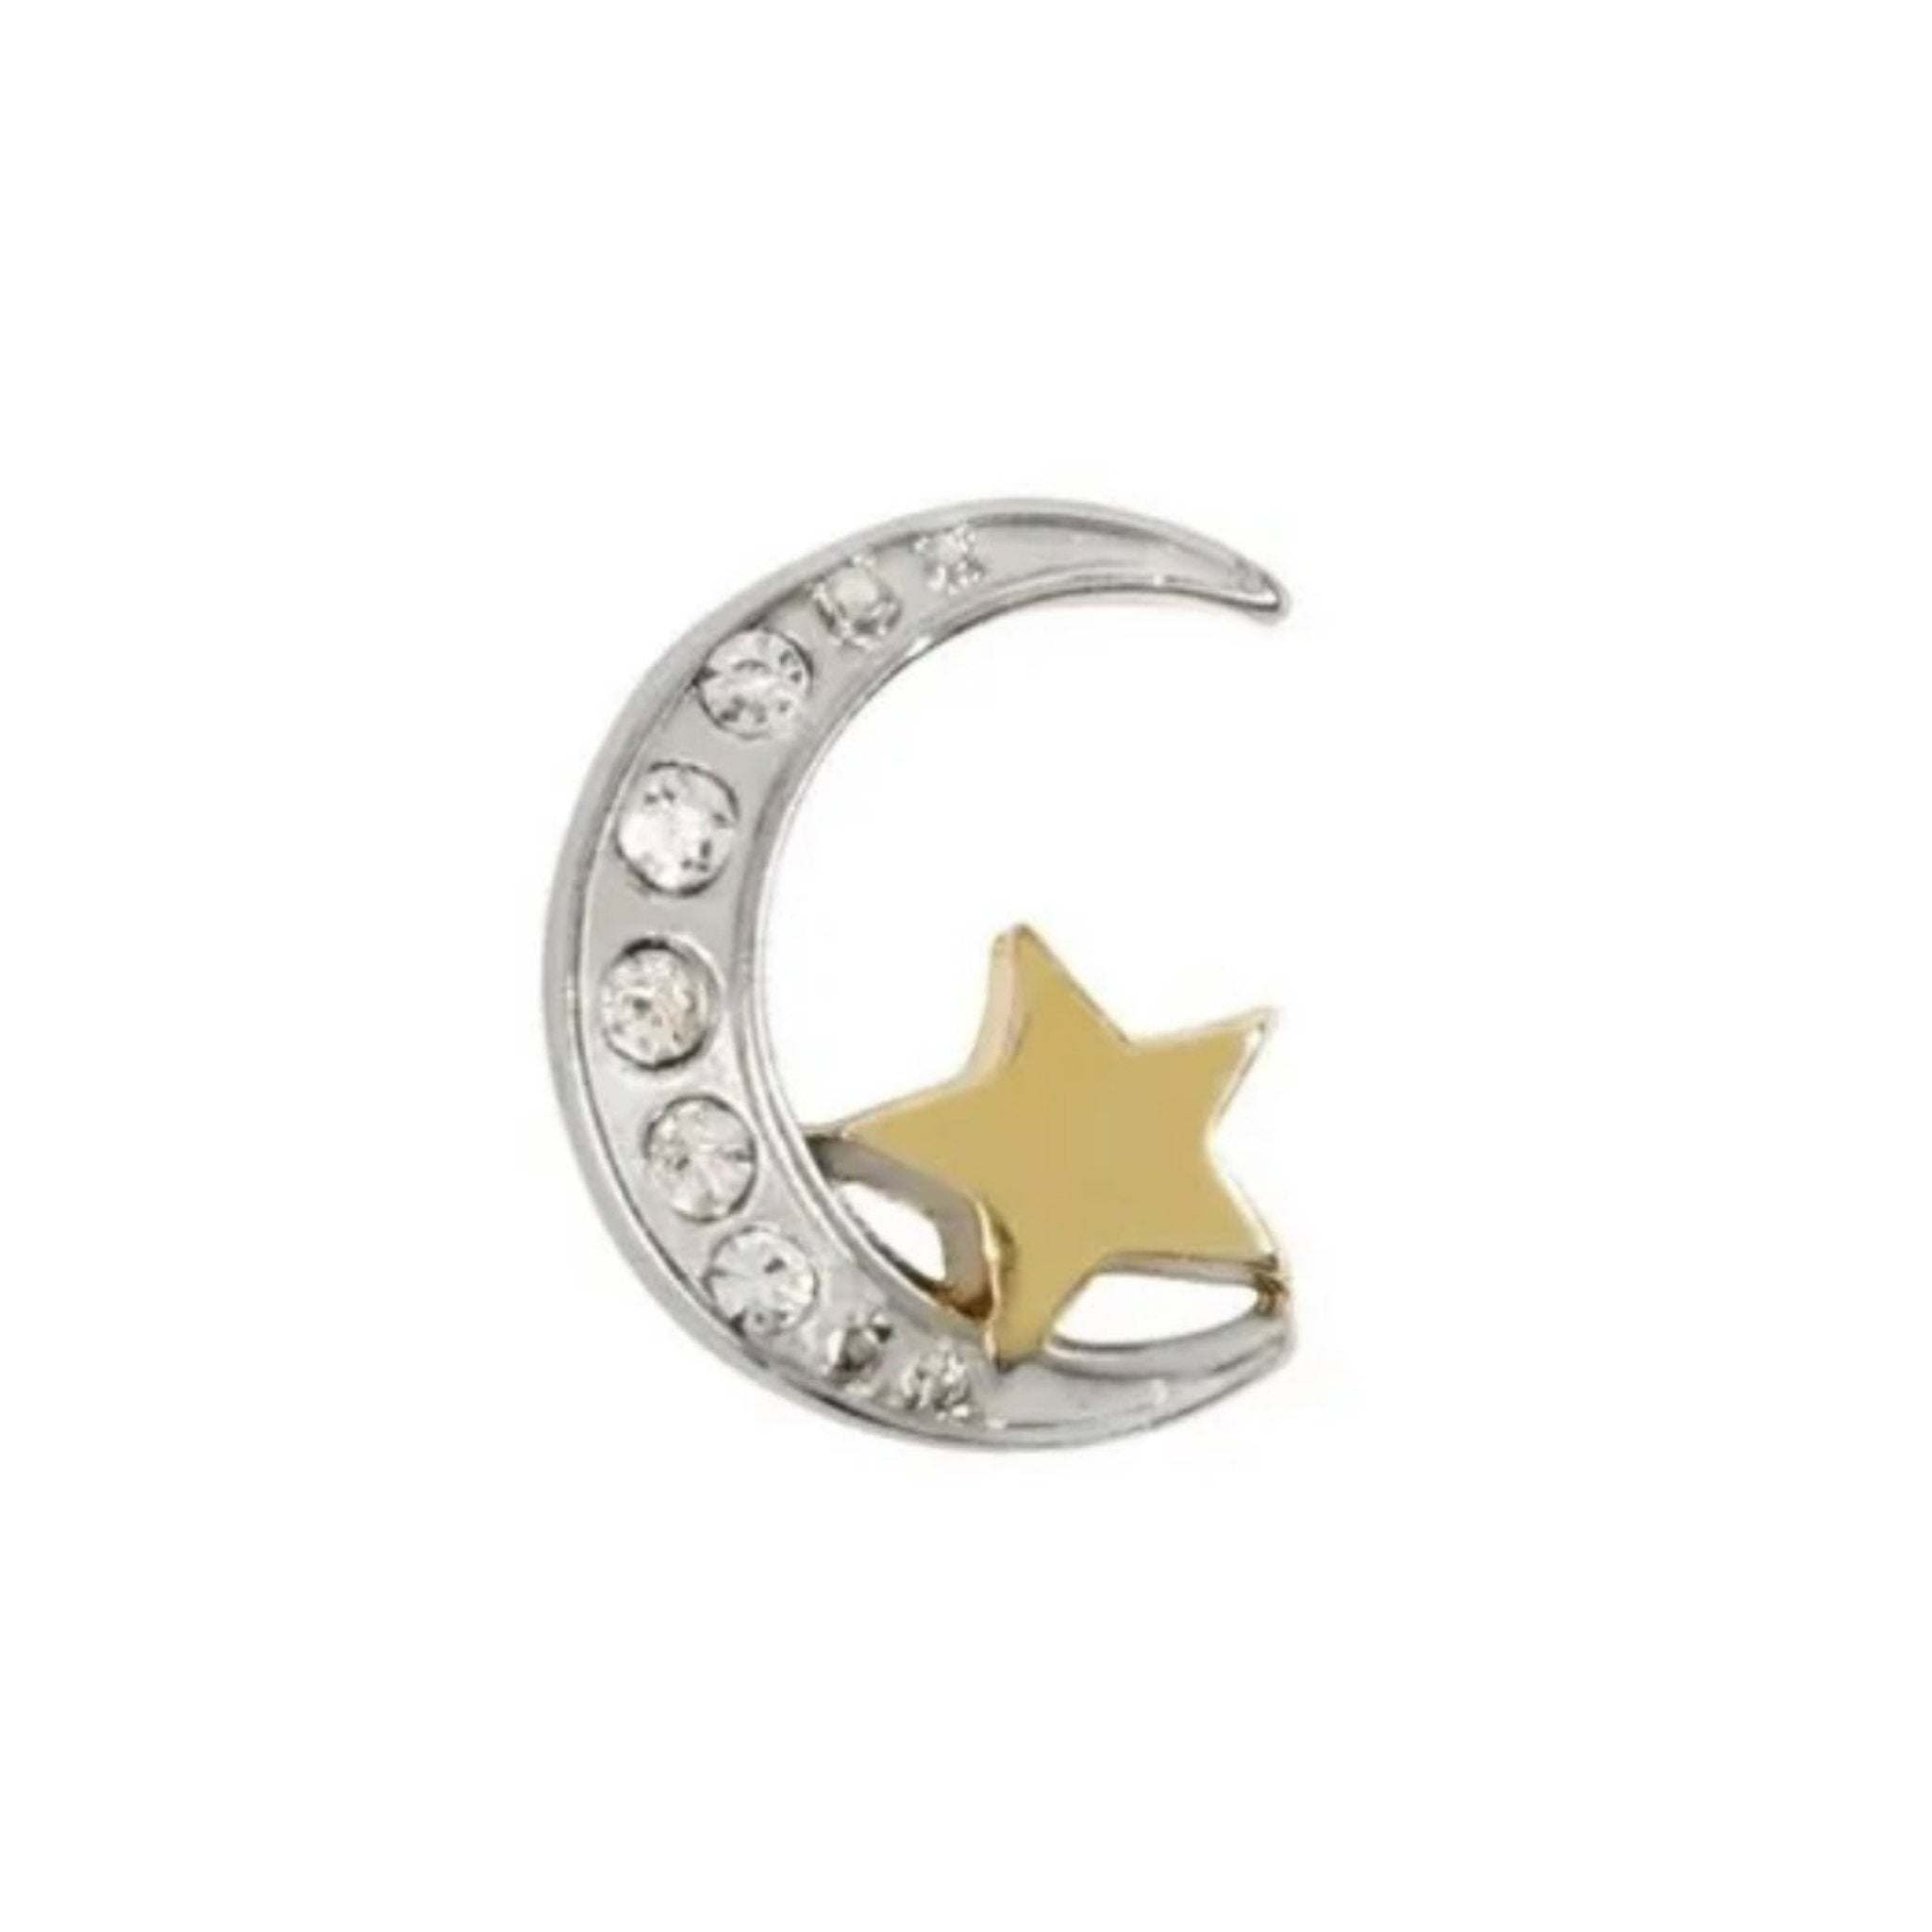 Memory Locket Charm - Moon and star (silver and gold)